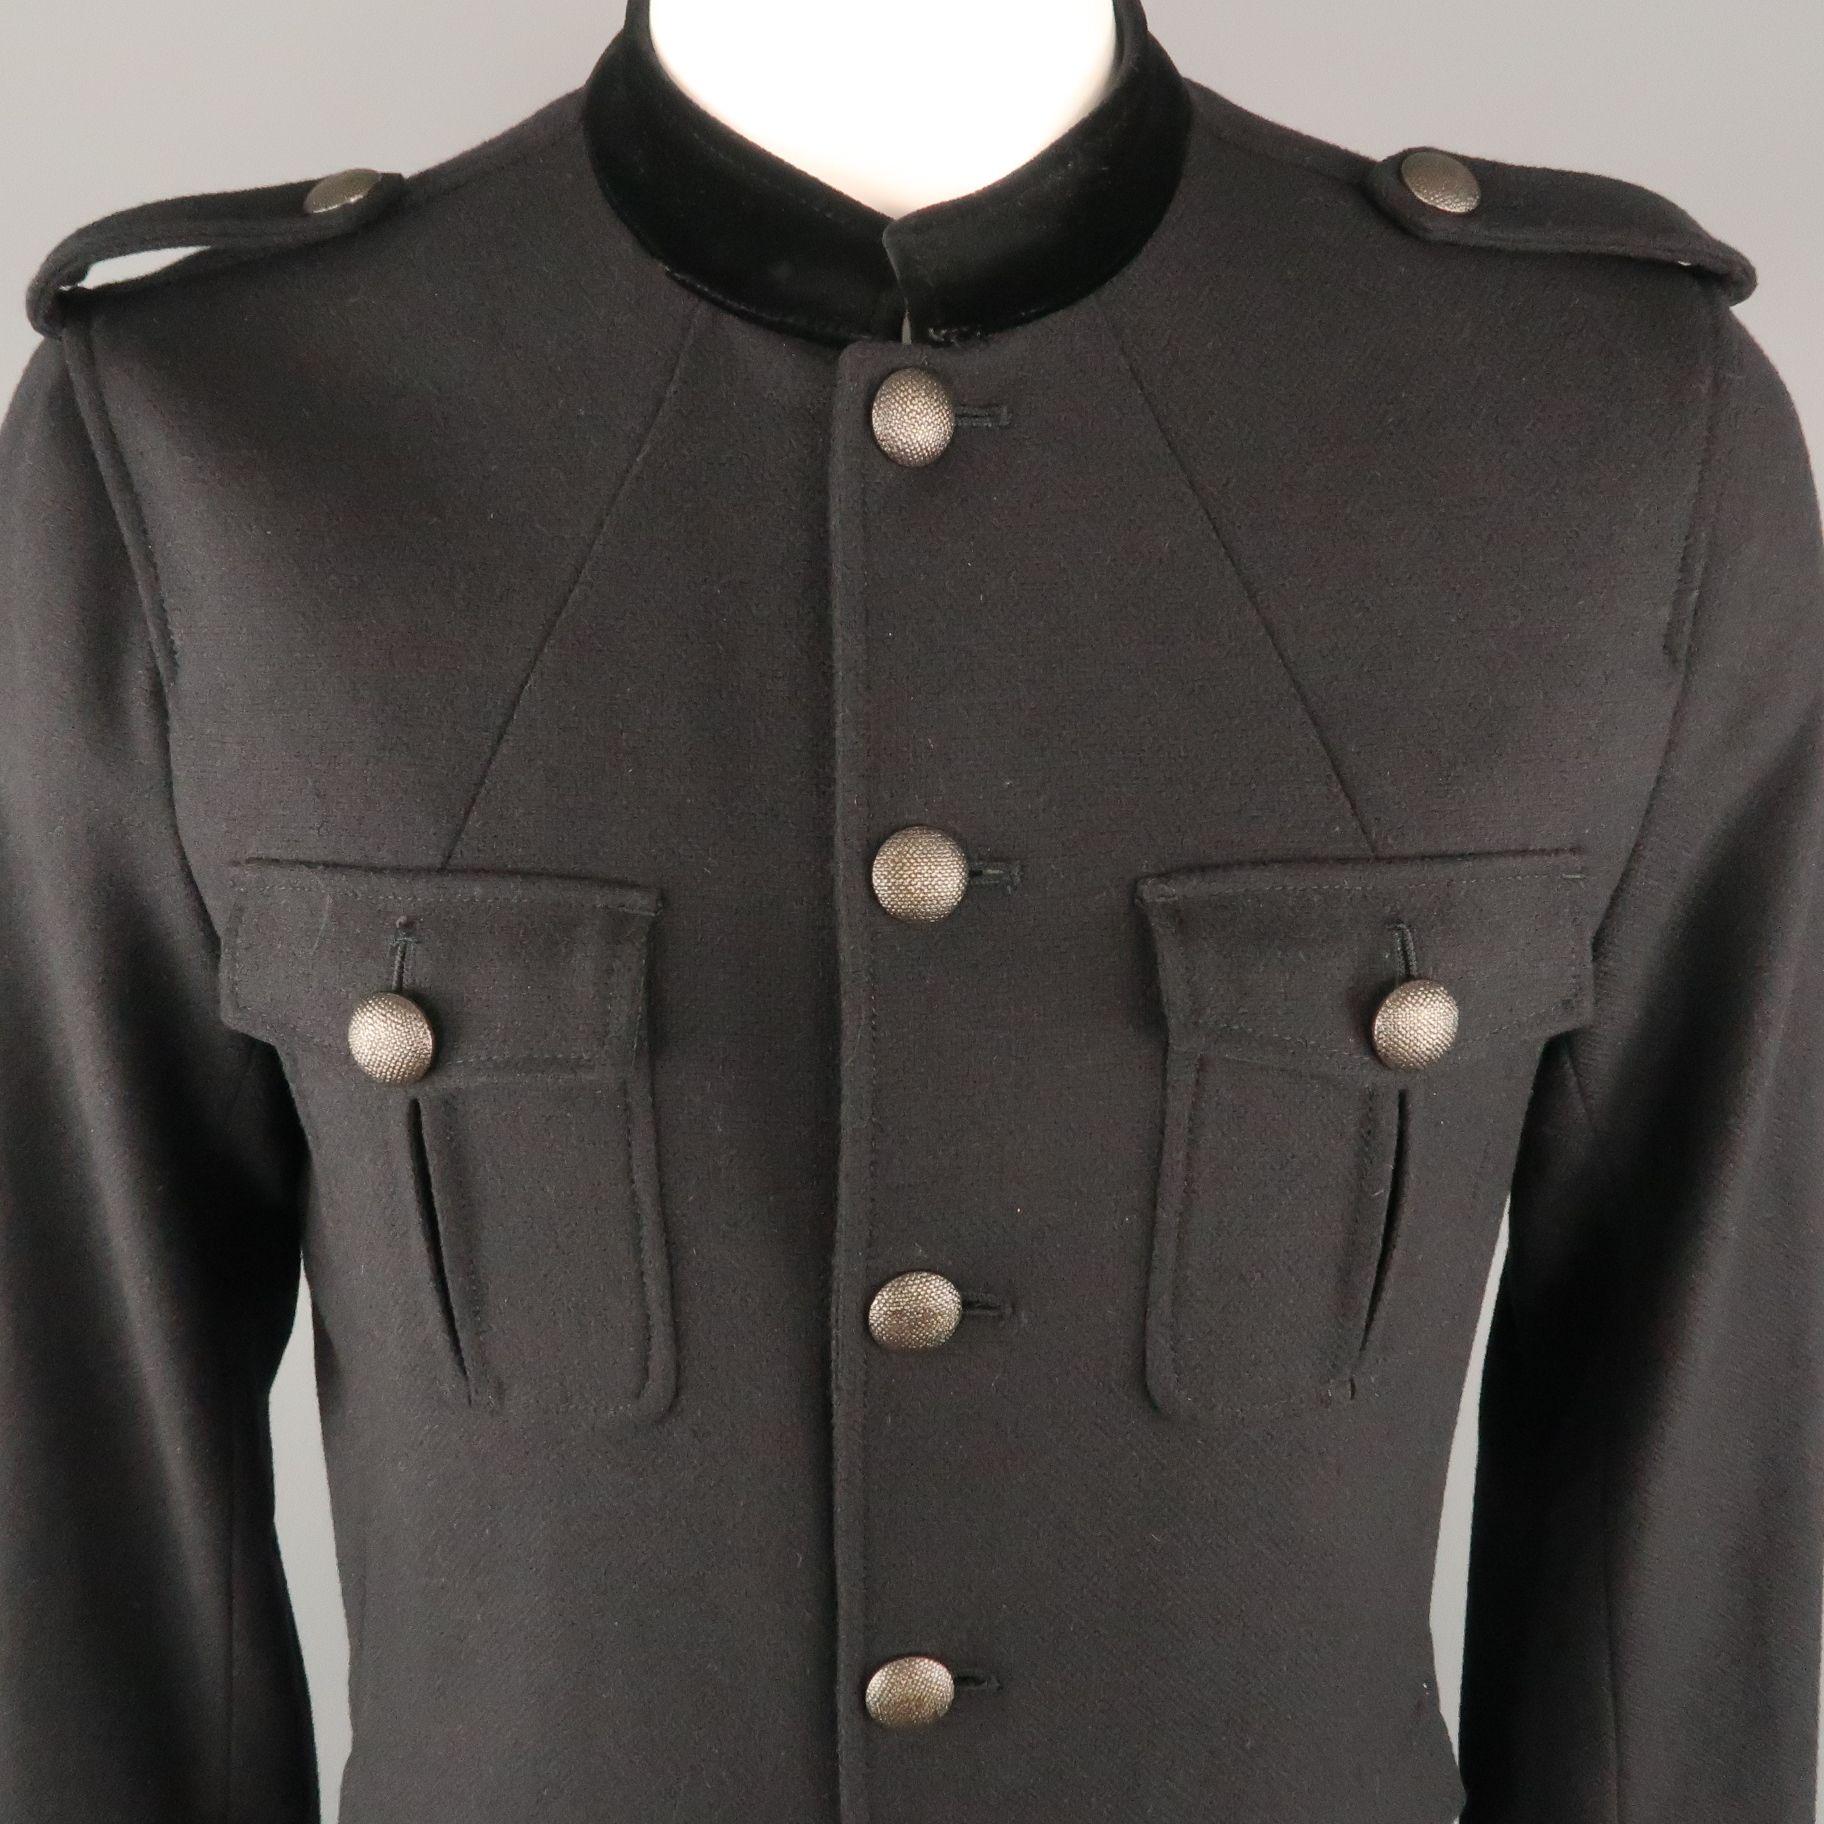 THEORY Military Style Jacket comes in a black tone in a solid wool / camel material, with epaulettes, a velvet collar, patch and flap pockets, unbuttoned cuffs and a single vent at back.
 
Excellent Pre-Owned Condition.
Marked: L
 
Measurements:
